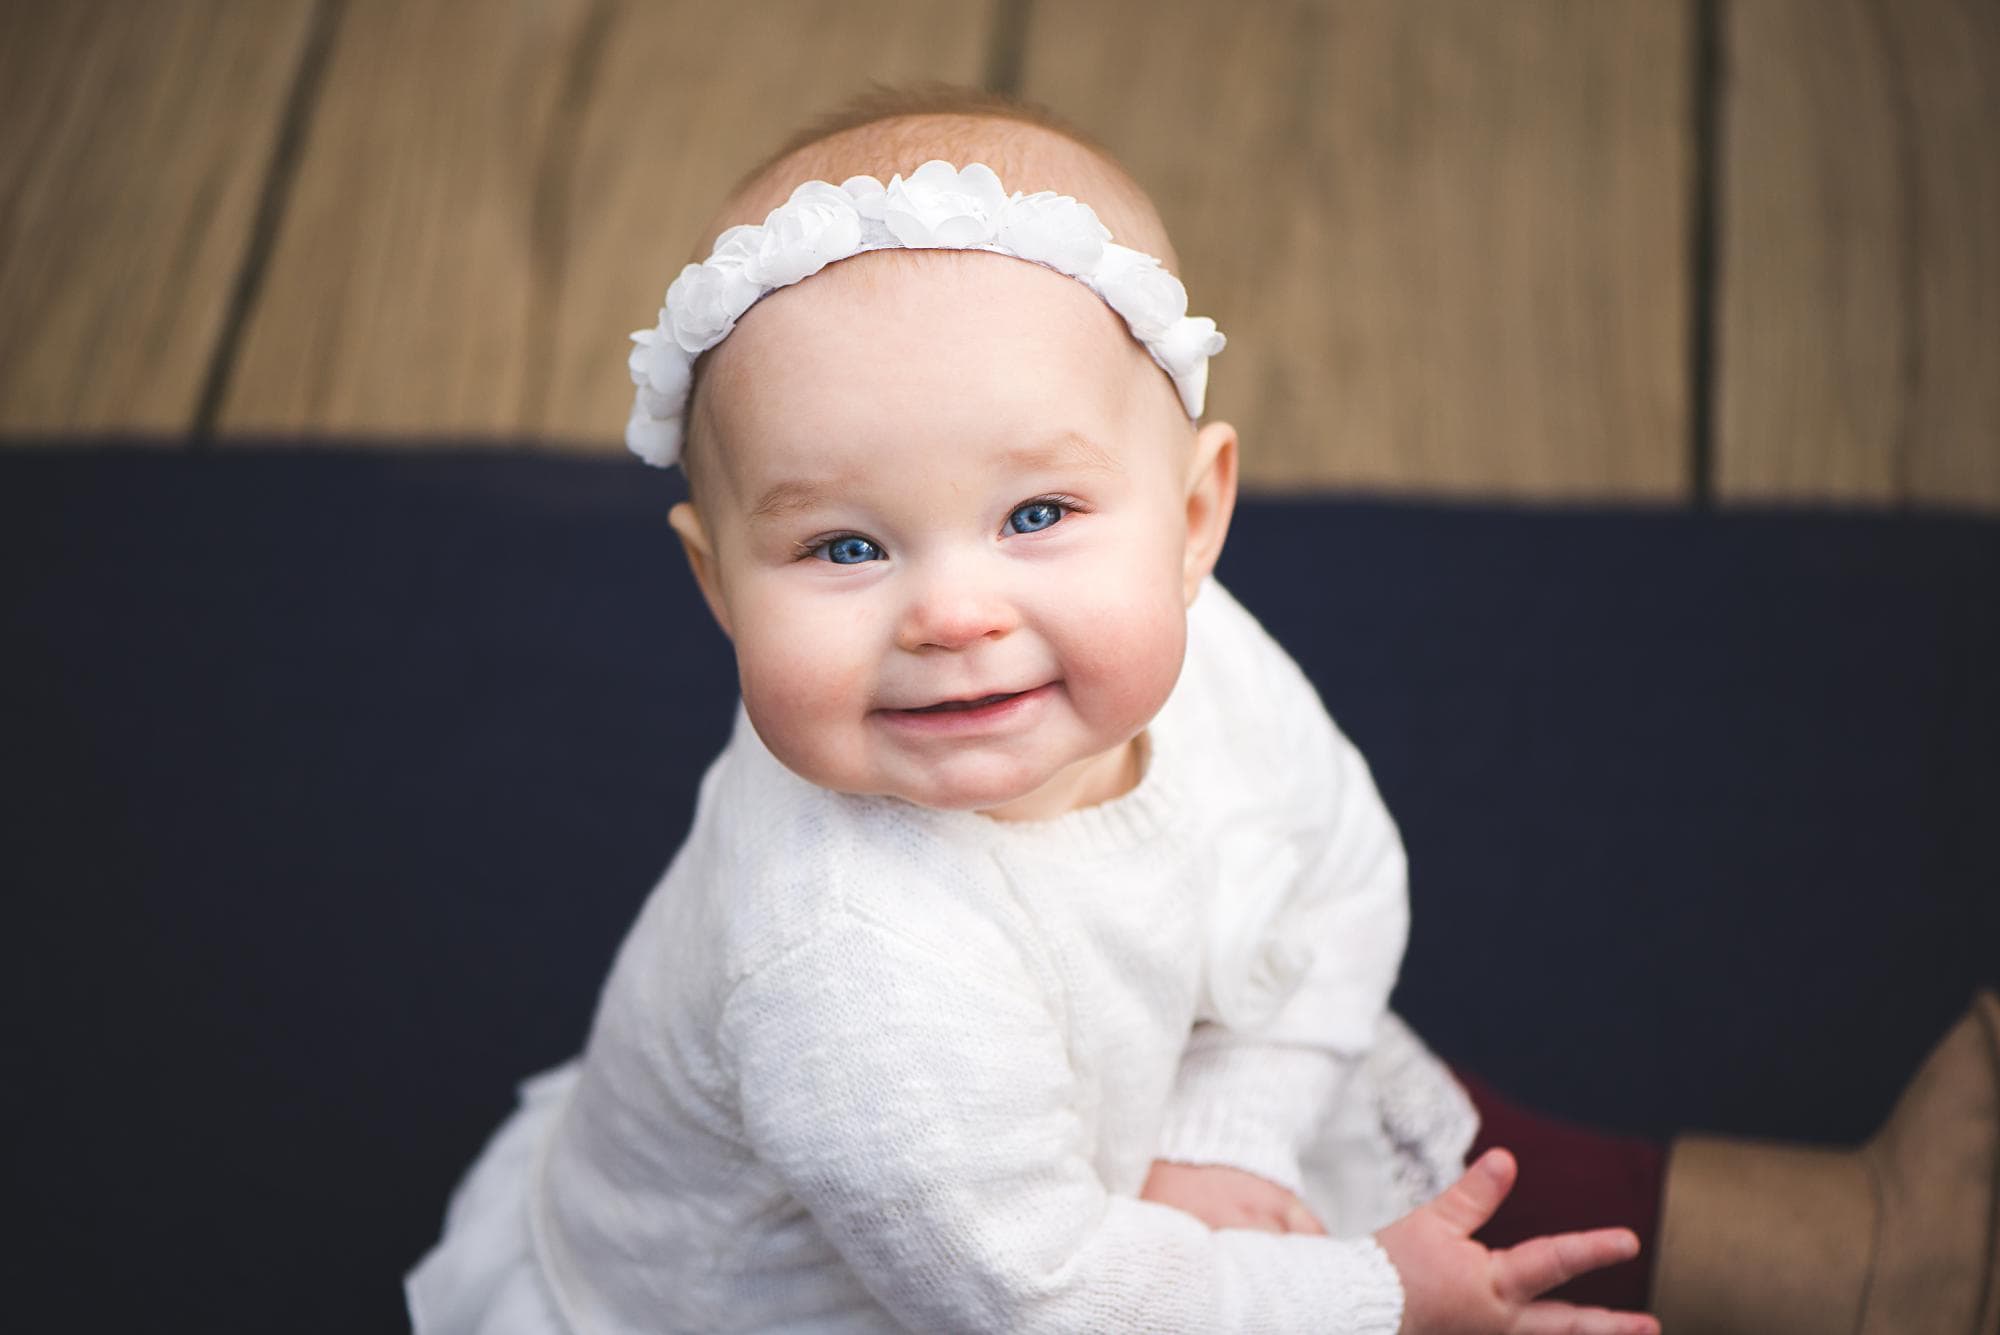 Infant girl with white dress and headband looking up at camera